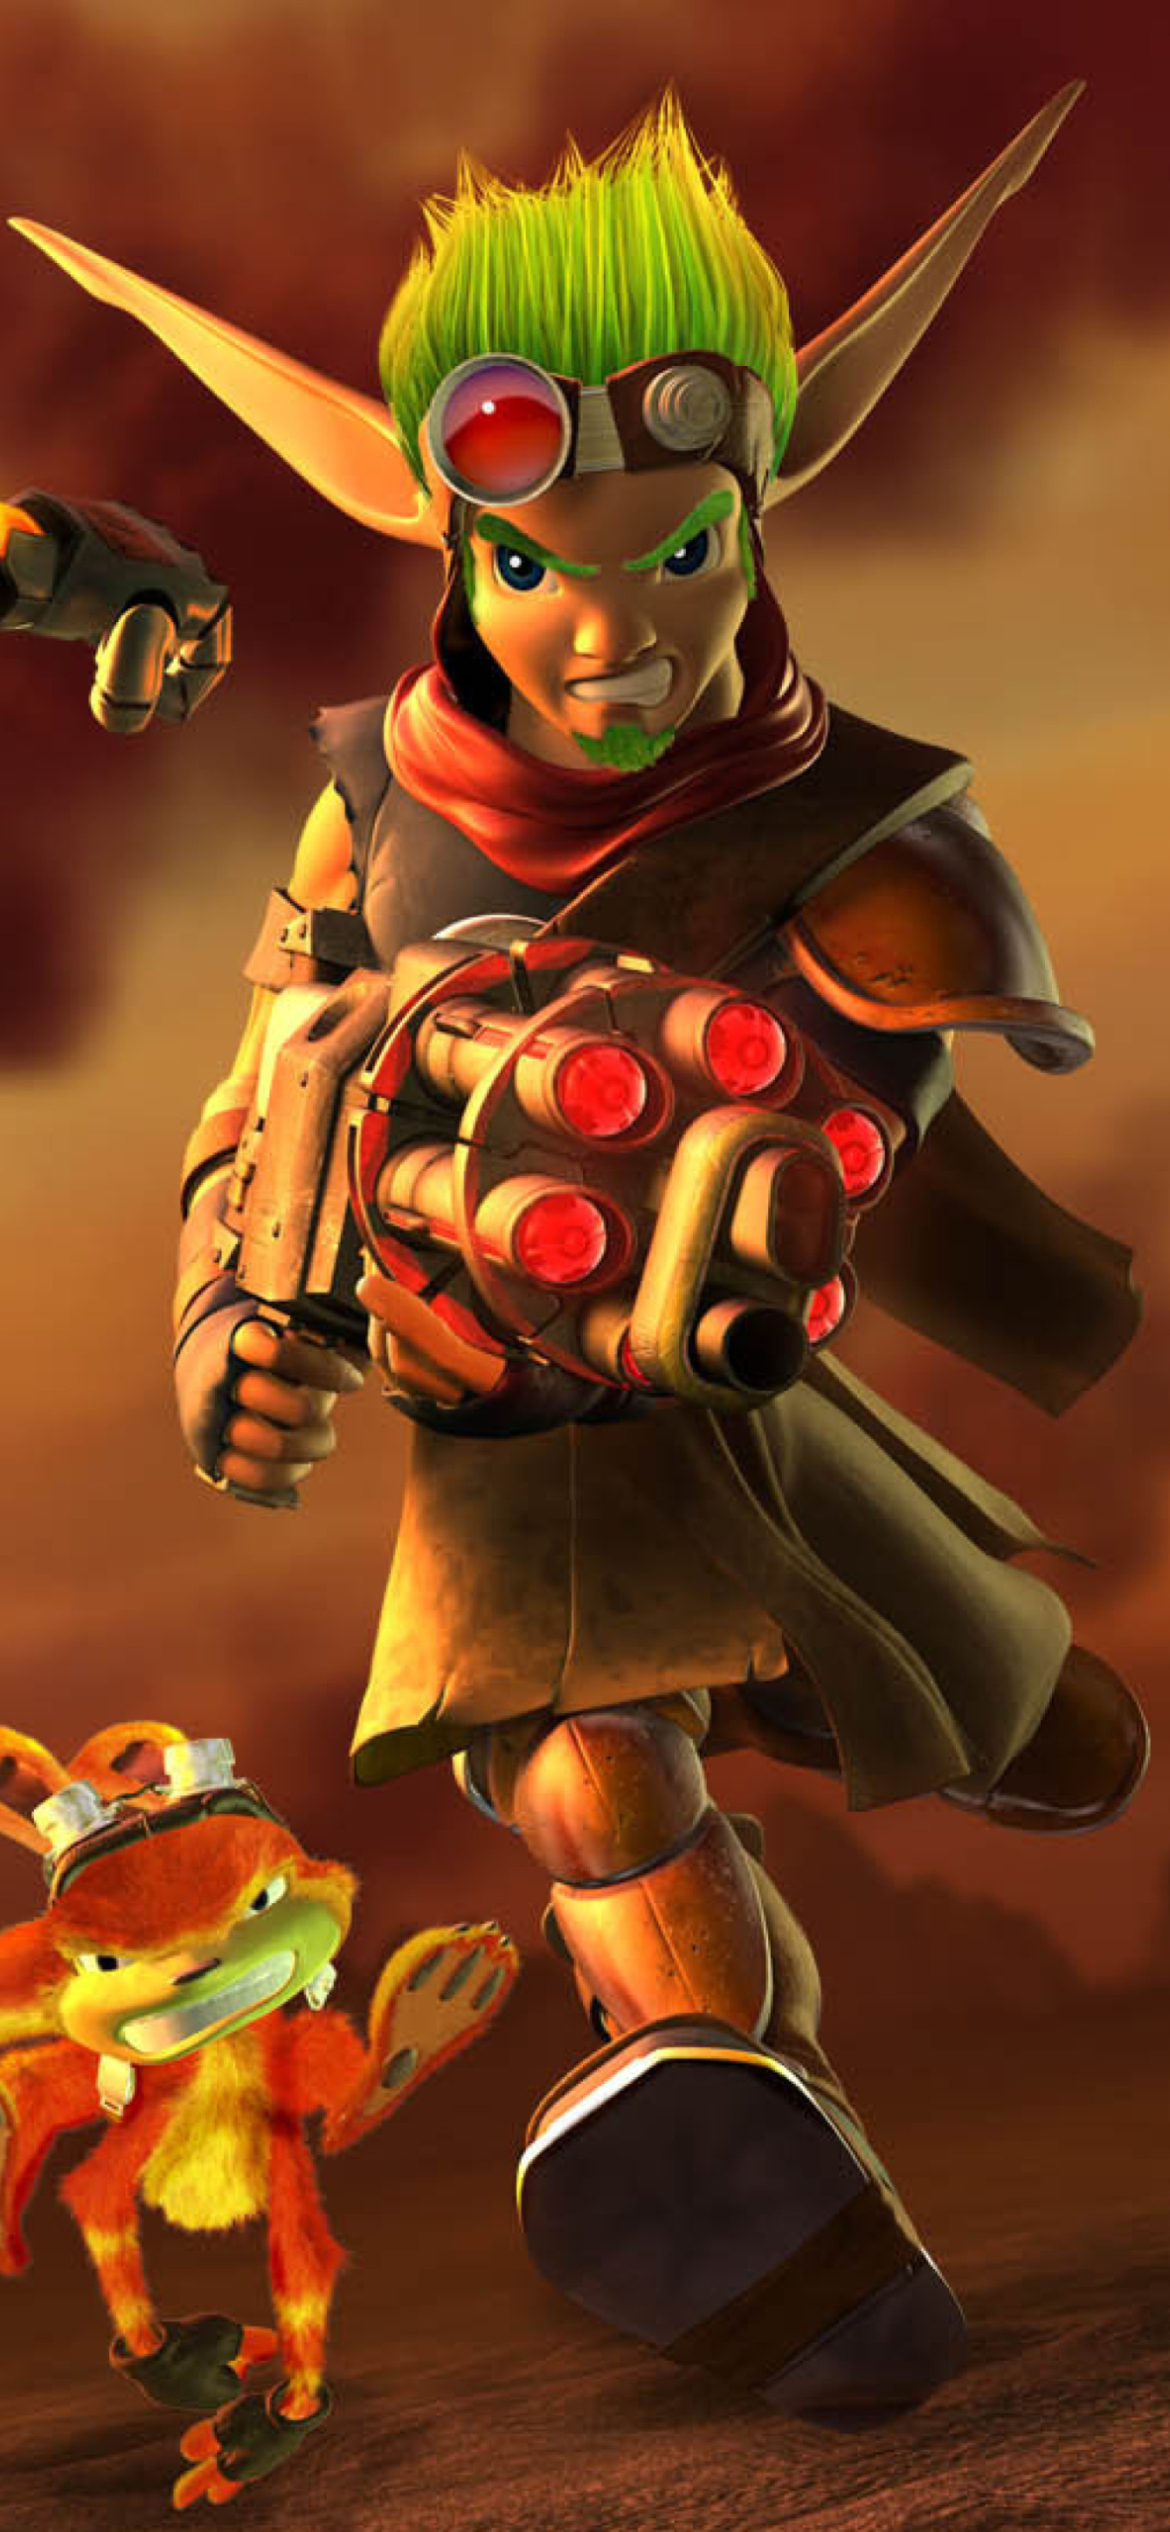 Jak and Daxter - Ratchet and Clank wallpaper 1170x2532